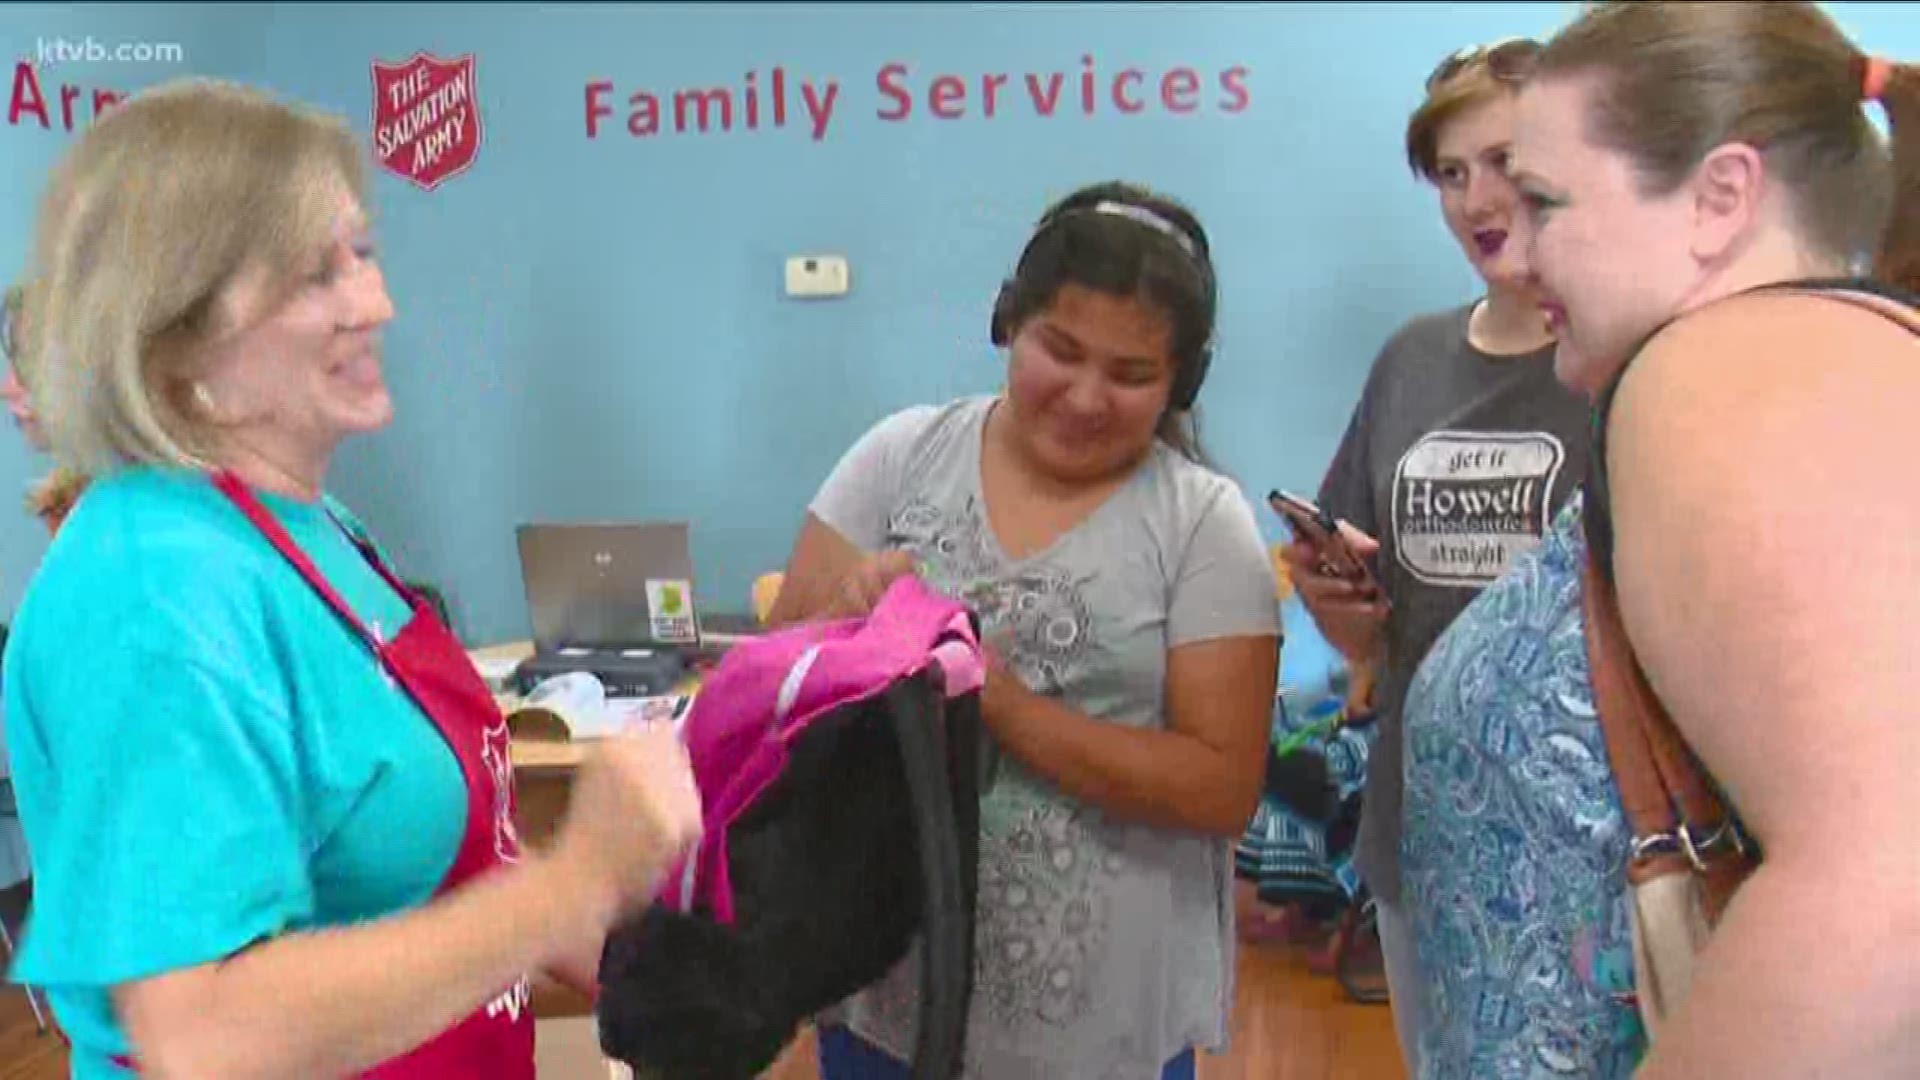 The backpacks went to needy children and will help their families save big for school.